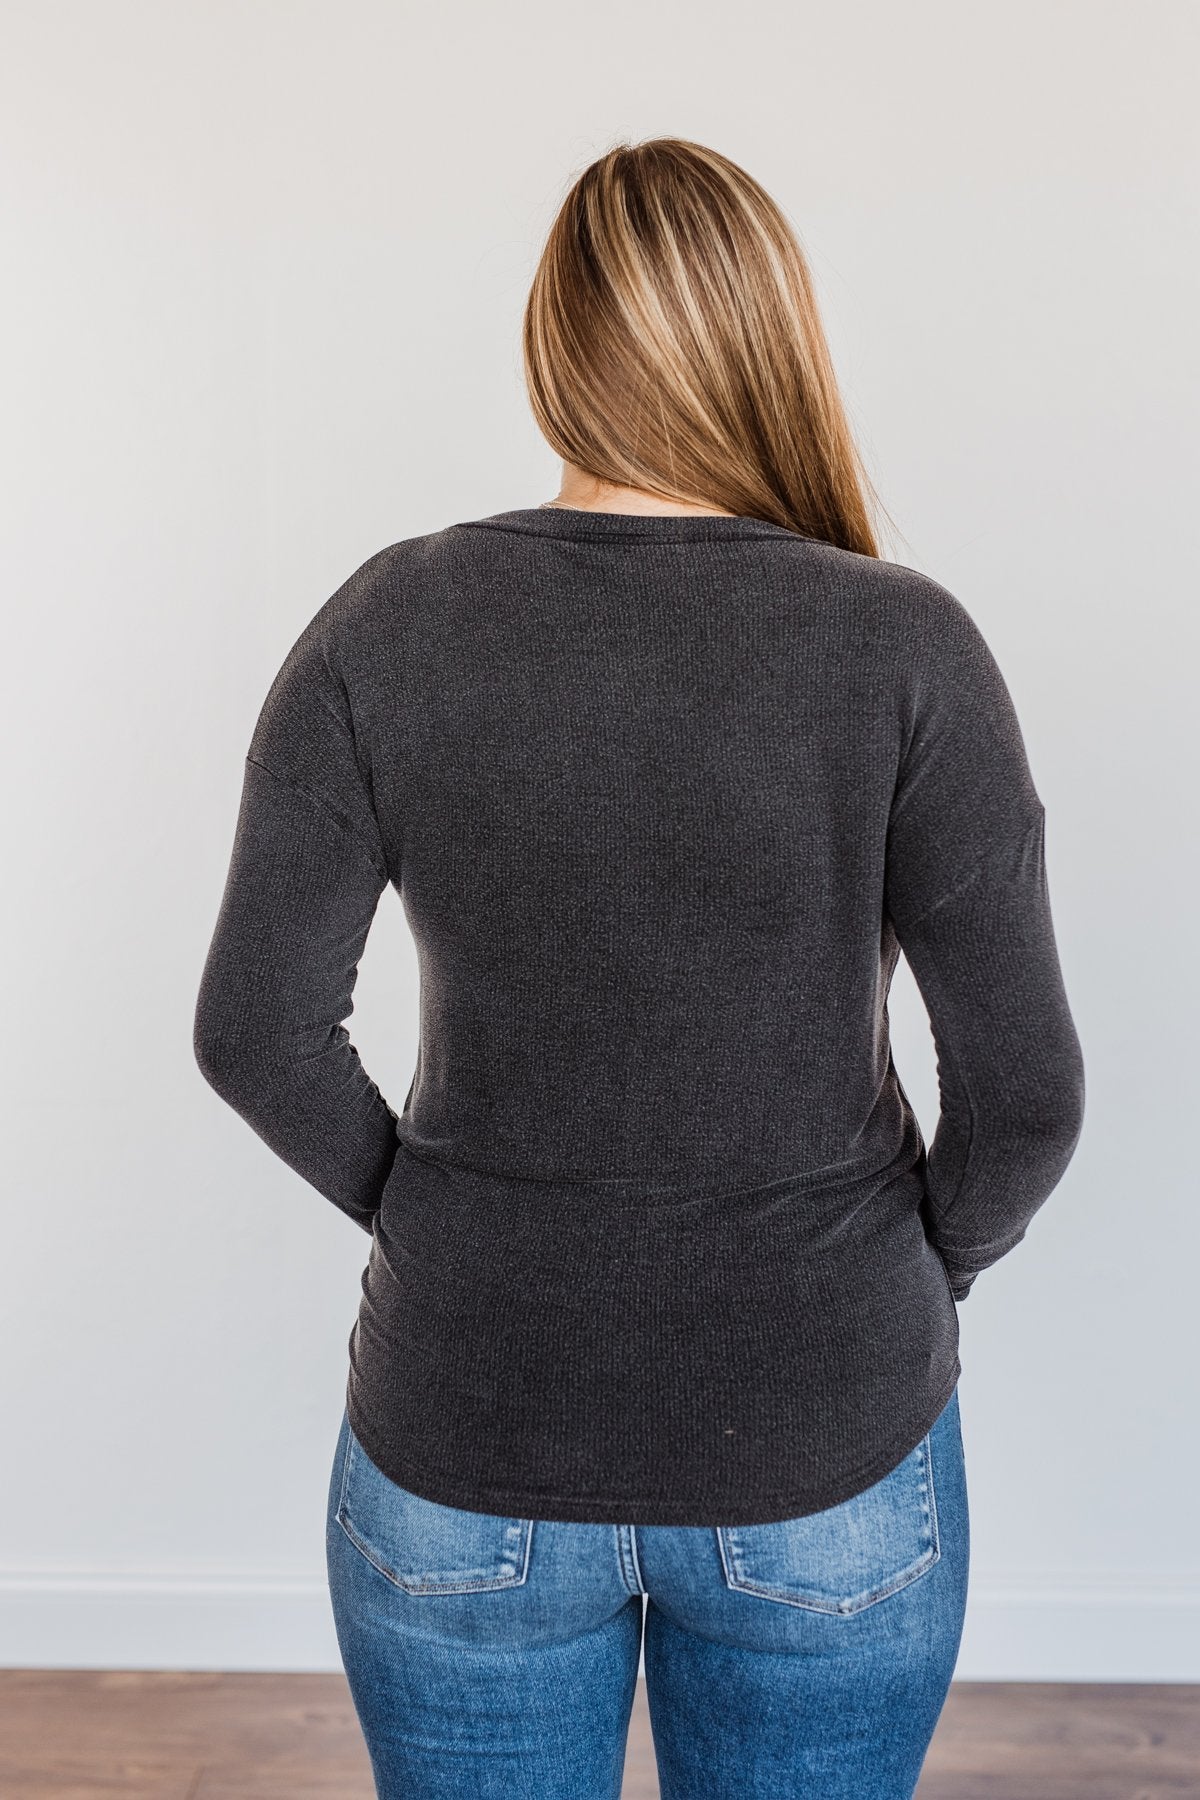 Dearly Beloved Long Sleeve Top- Dark Charcoal